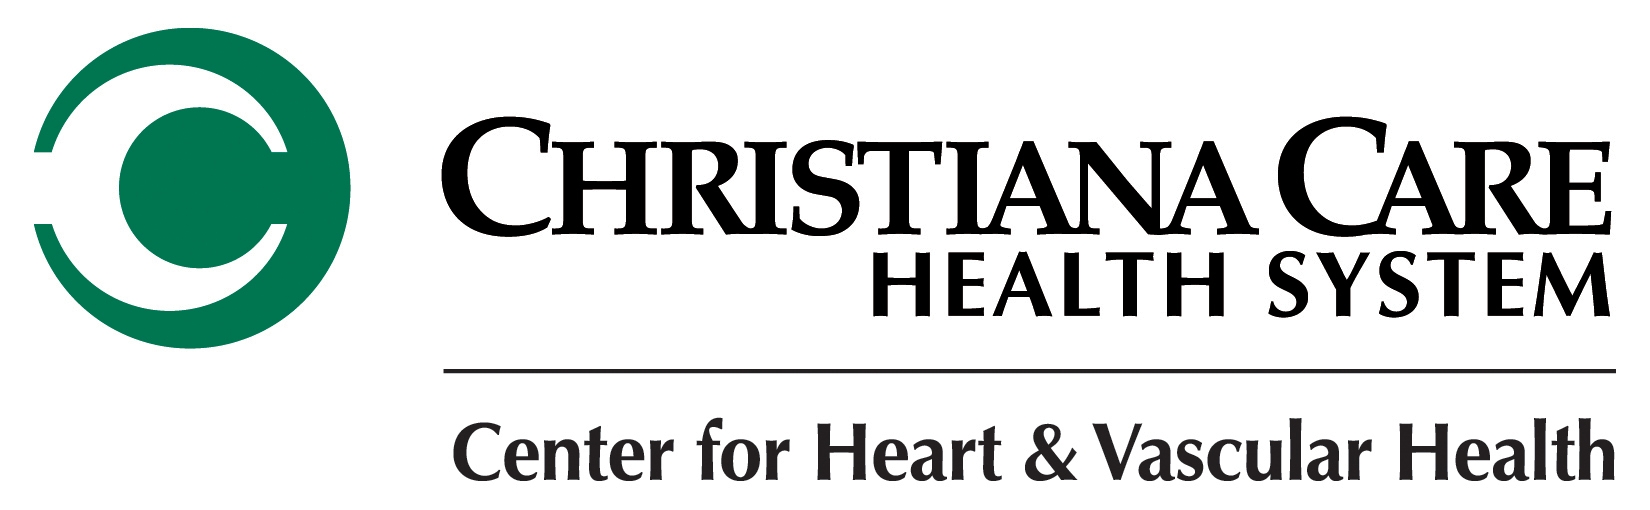 What services does the Christiana Hospital offer?